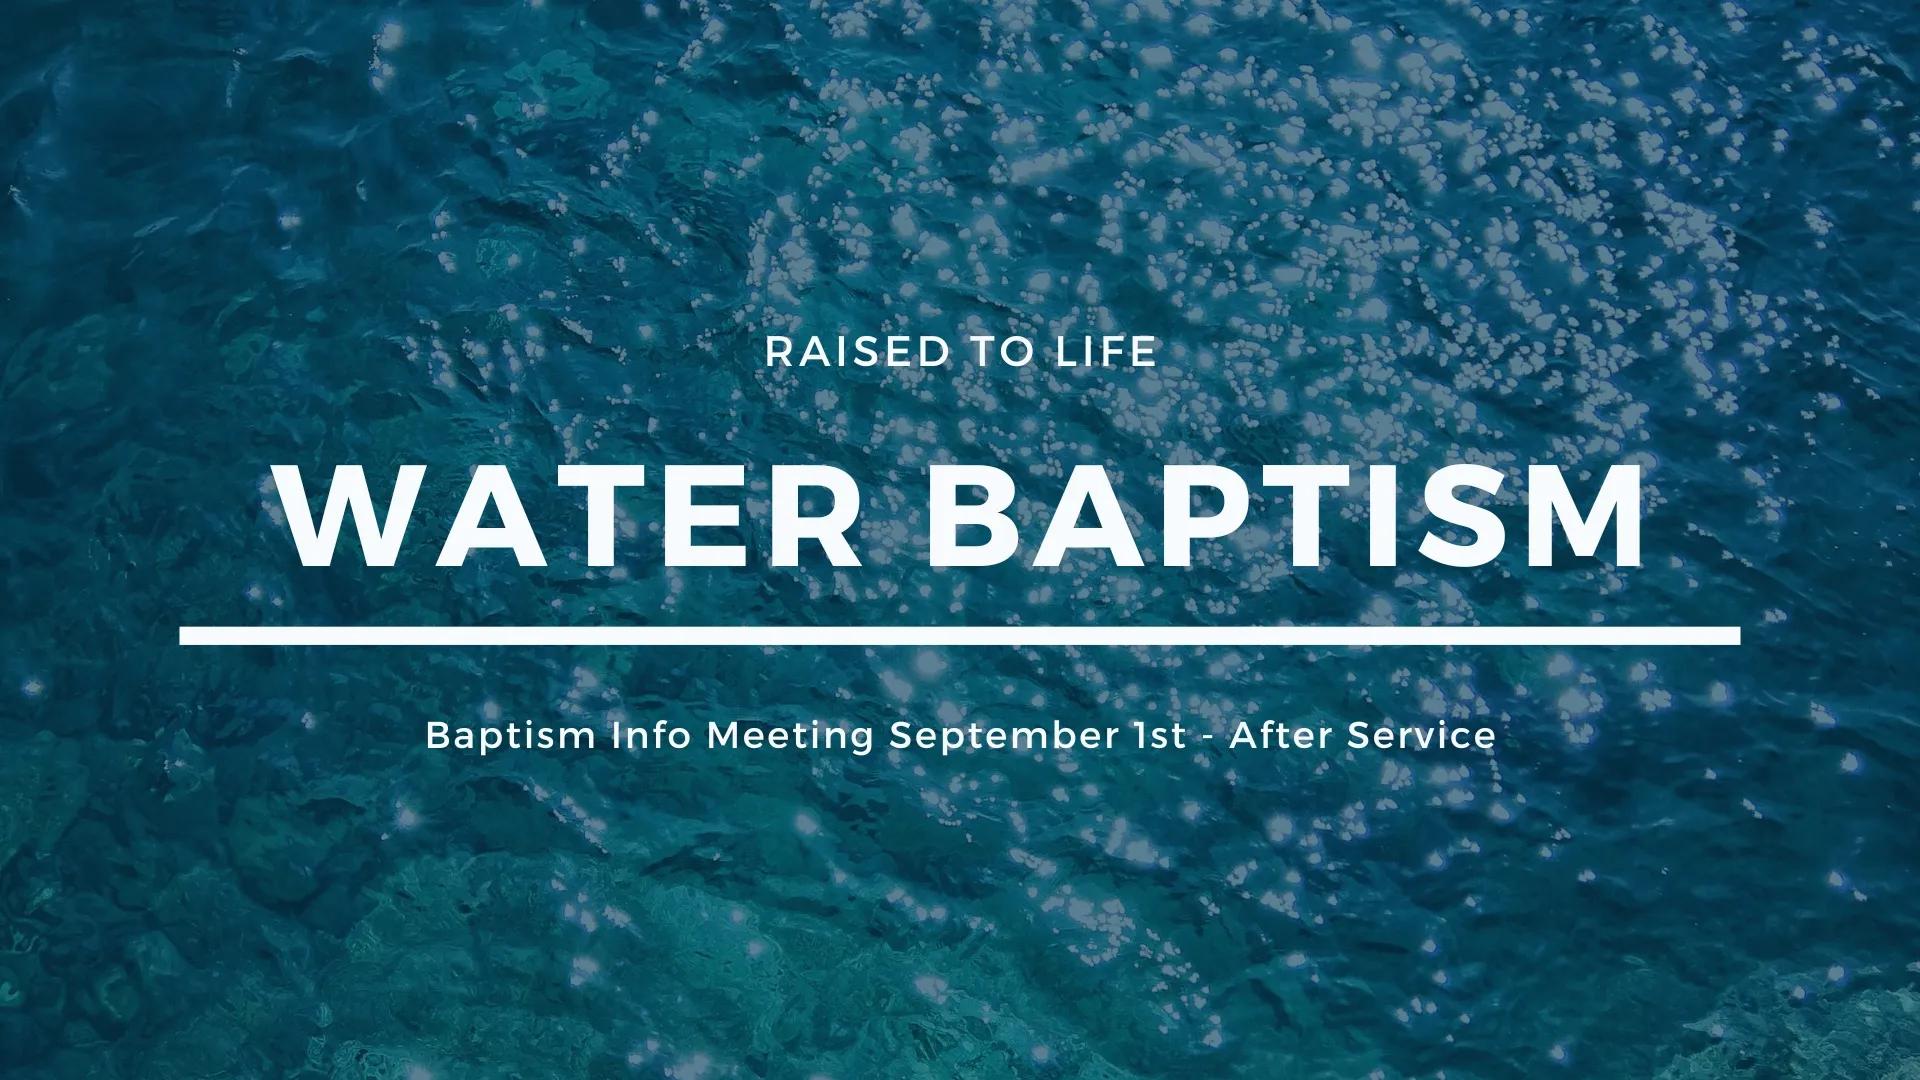 A simple graphic with water in the background and information about LVC's water baptism information meeting in September